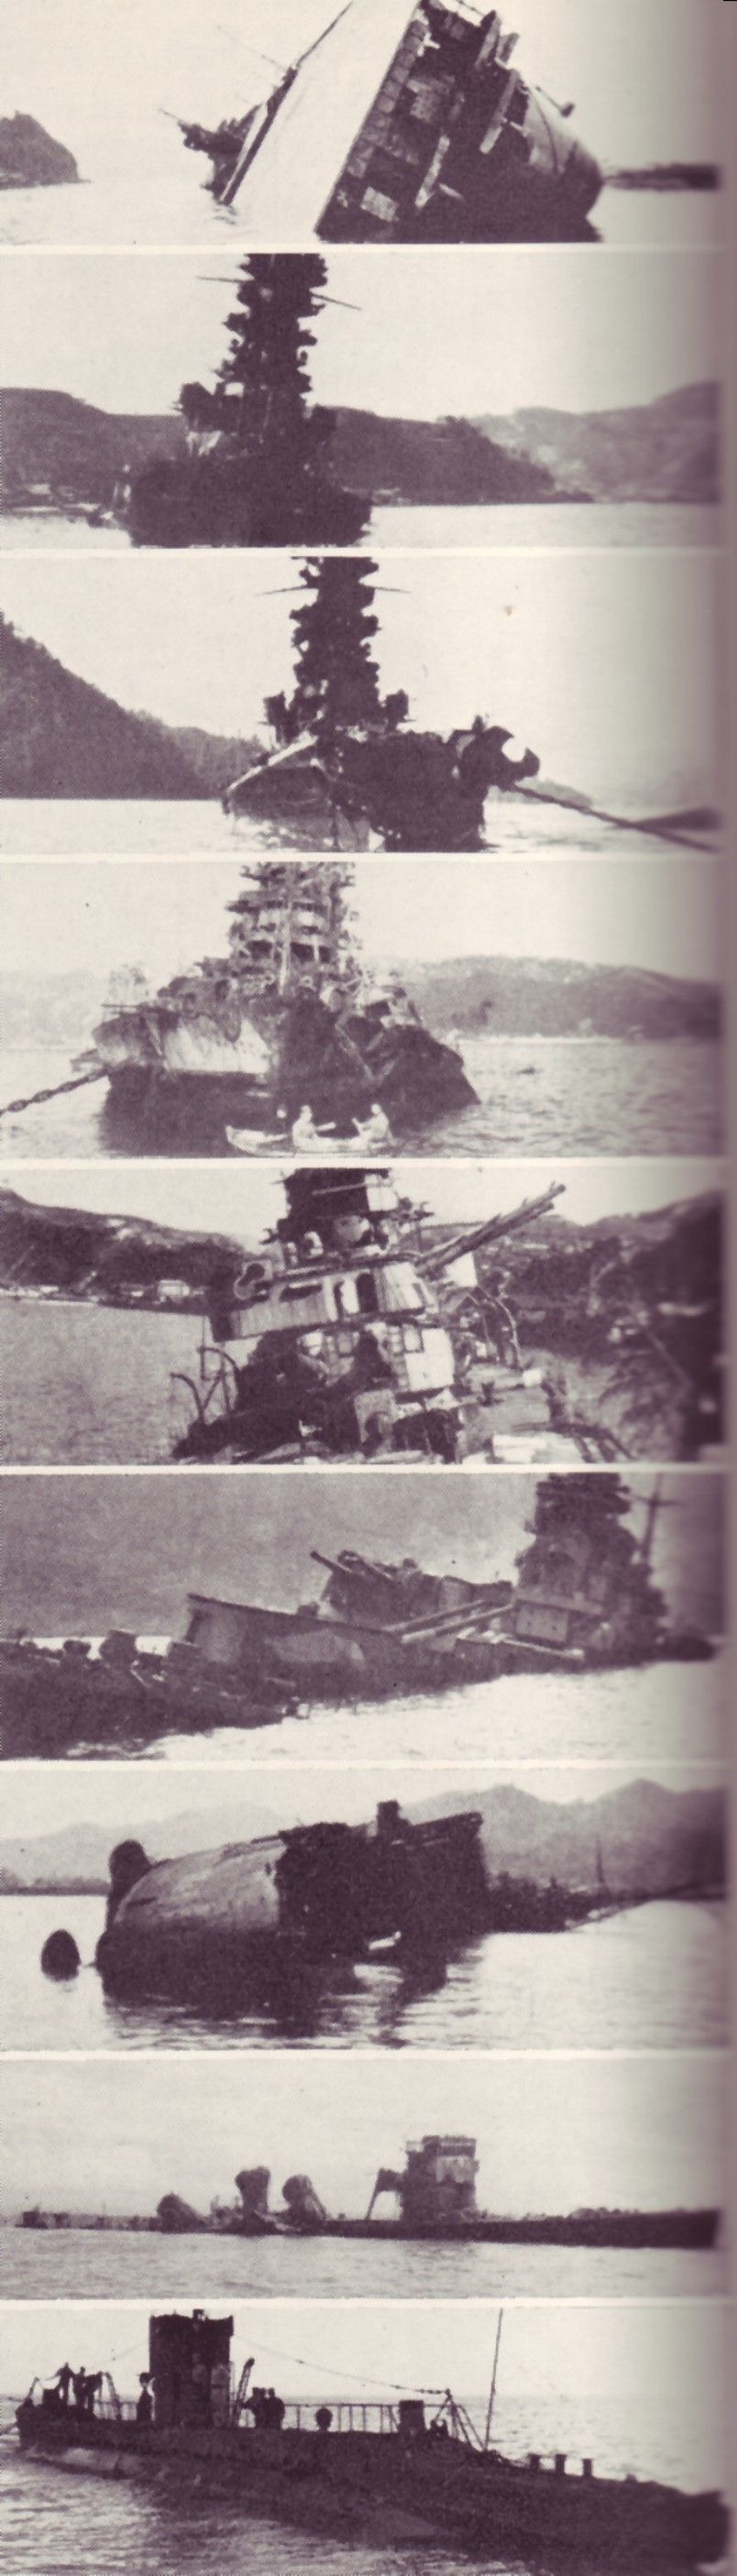 Remnants of the Imperial Japanese fleet